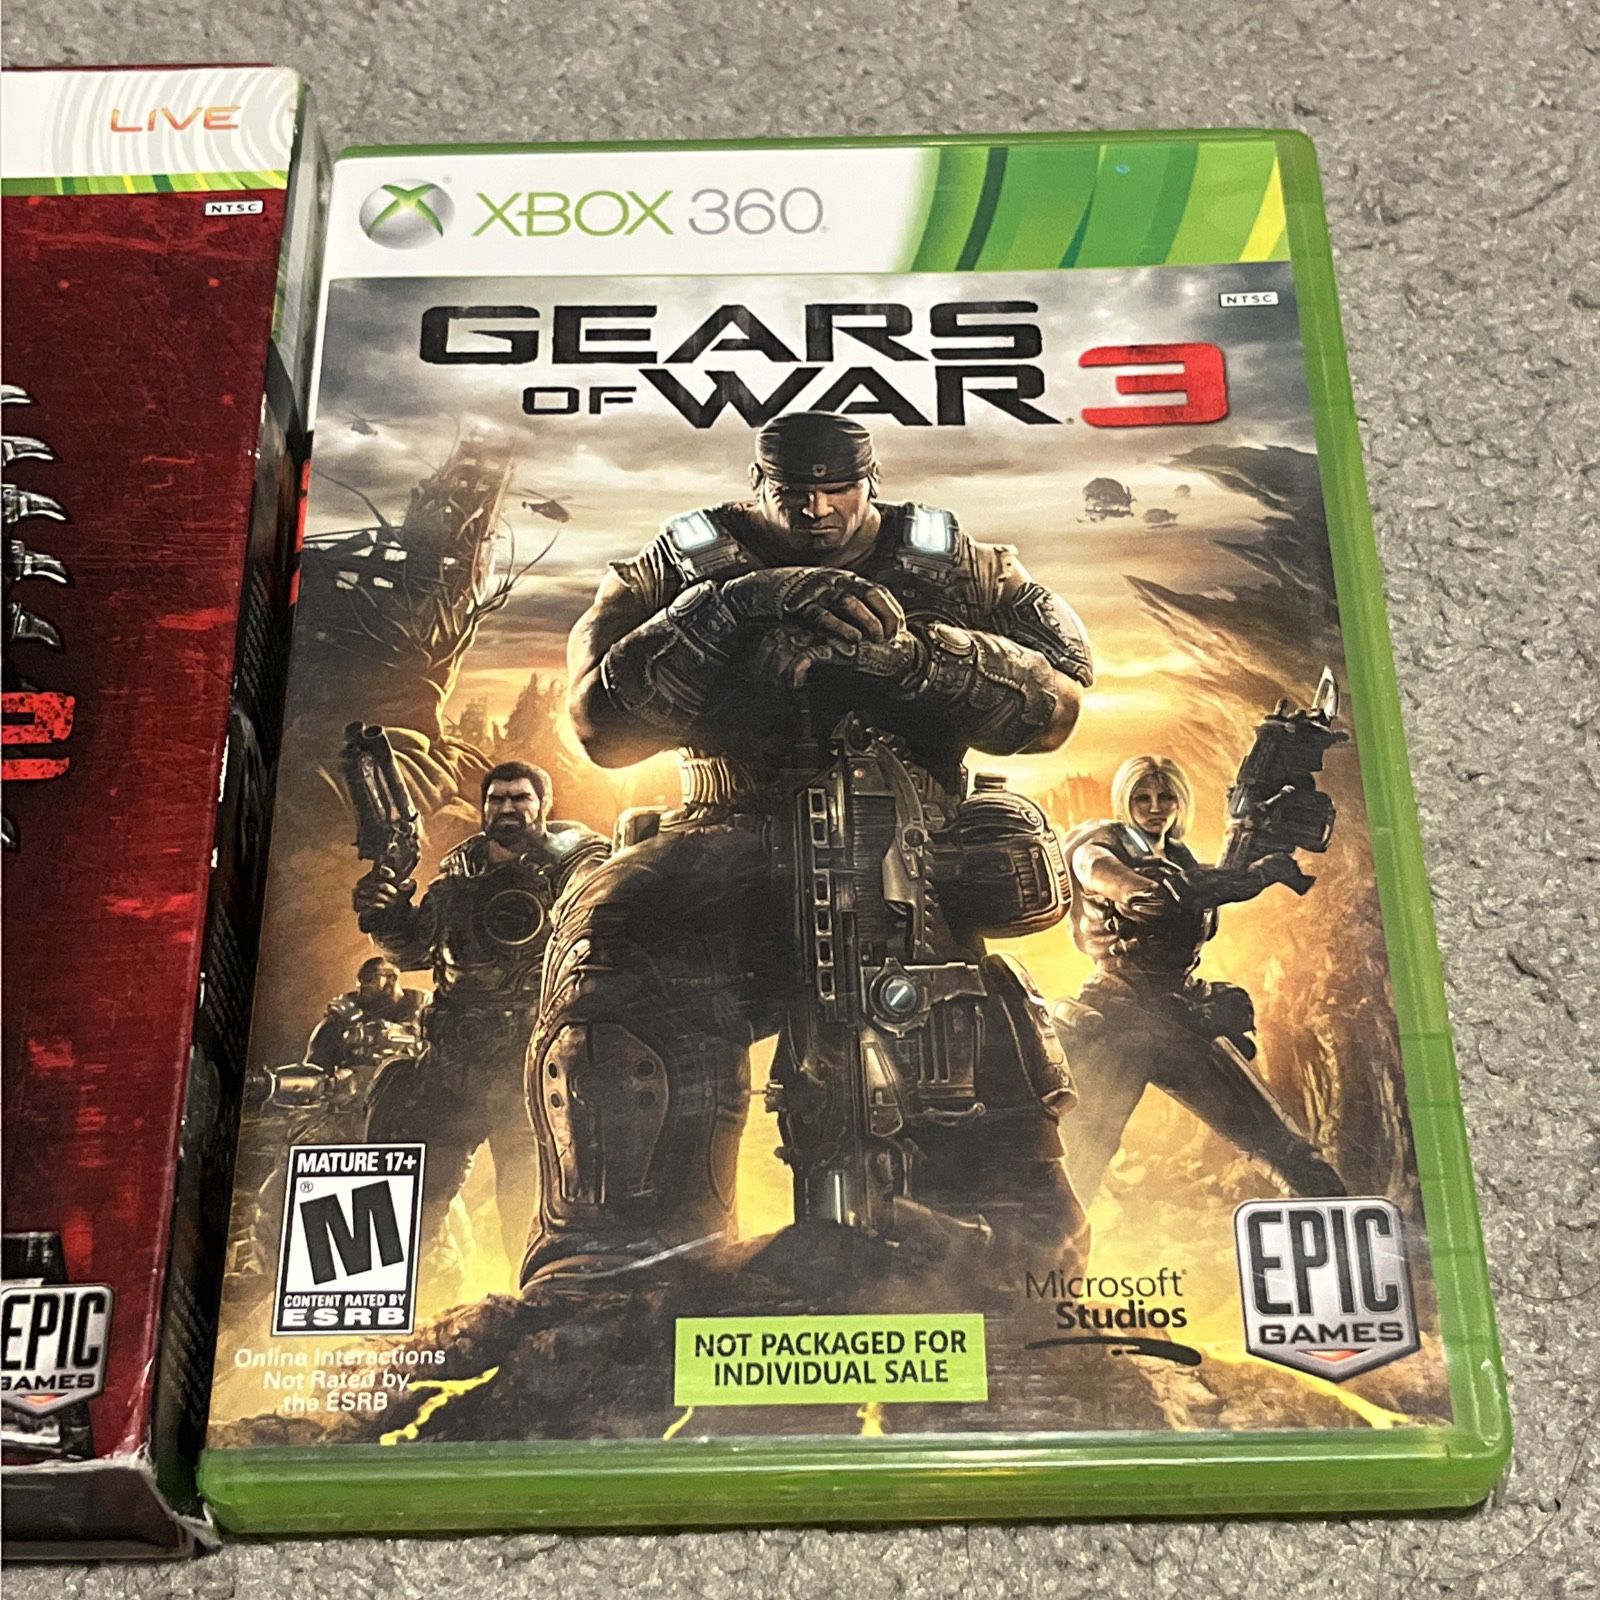 Halo 5, Dark Souls 3, Gears of War 4 for Xbox one for Sale in Stockton, CA  - OfferUp